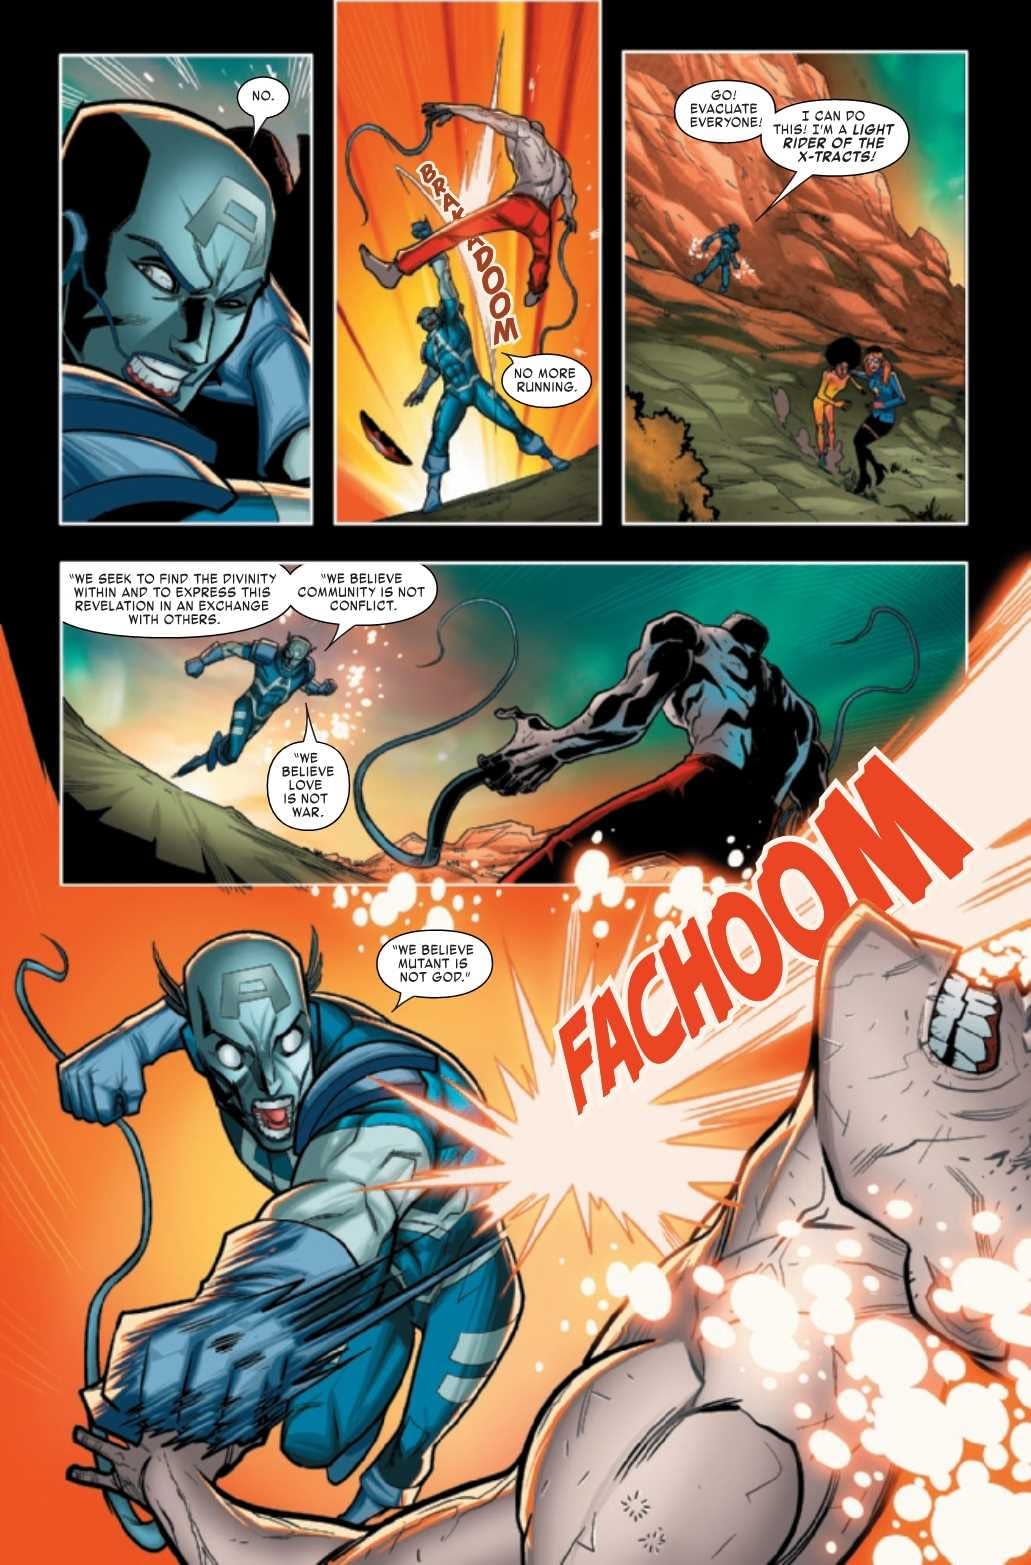 Apocalypse and the X-Tracts #4 Preview